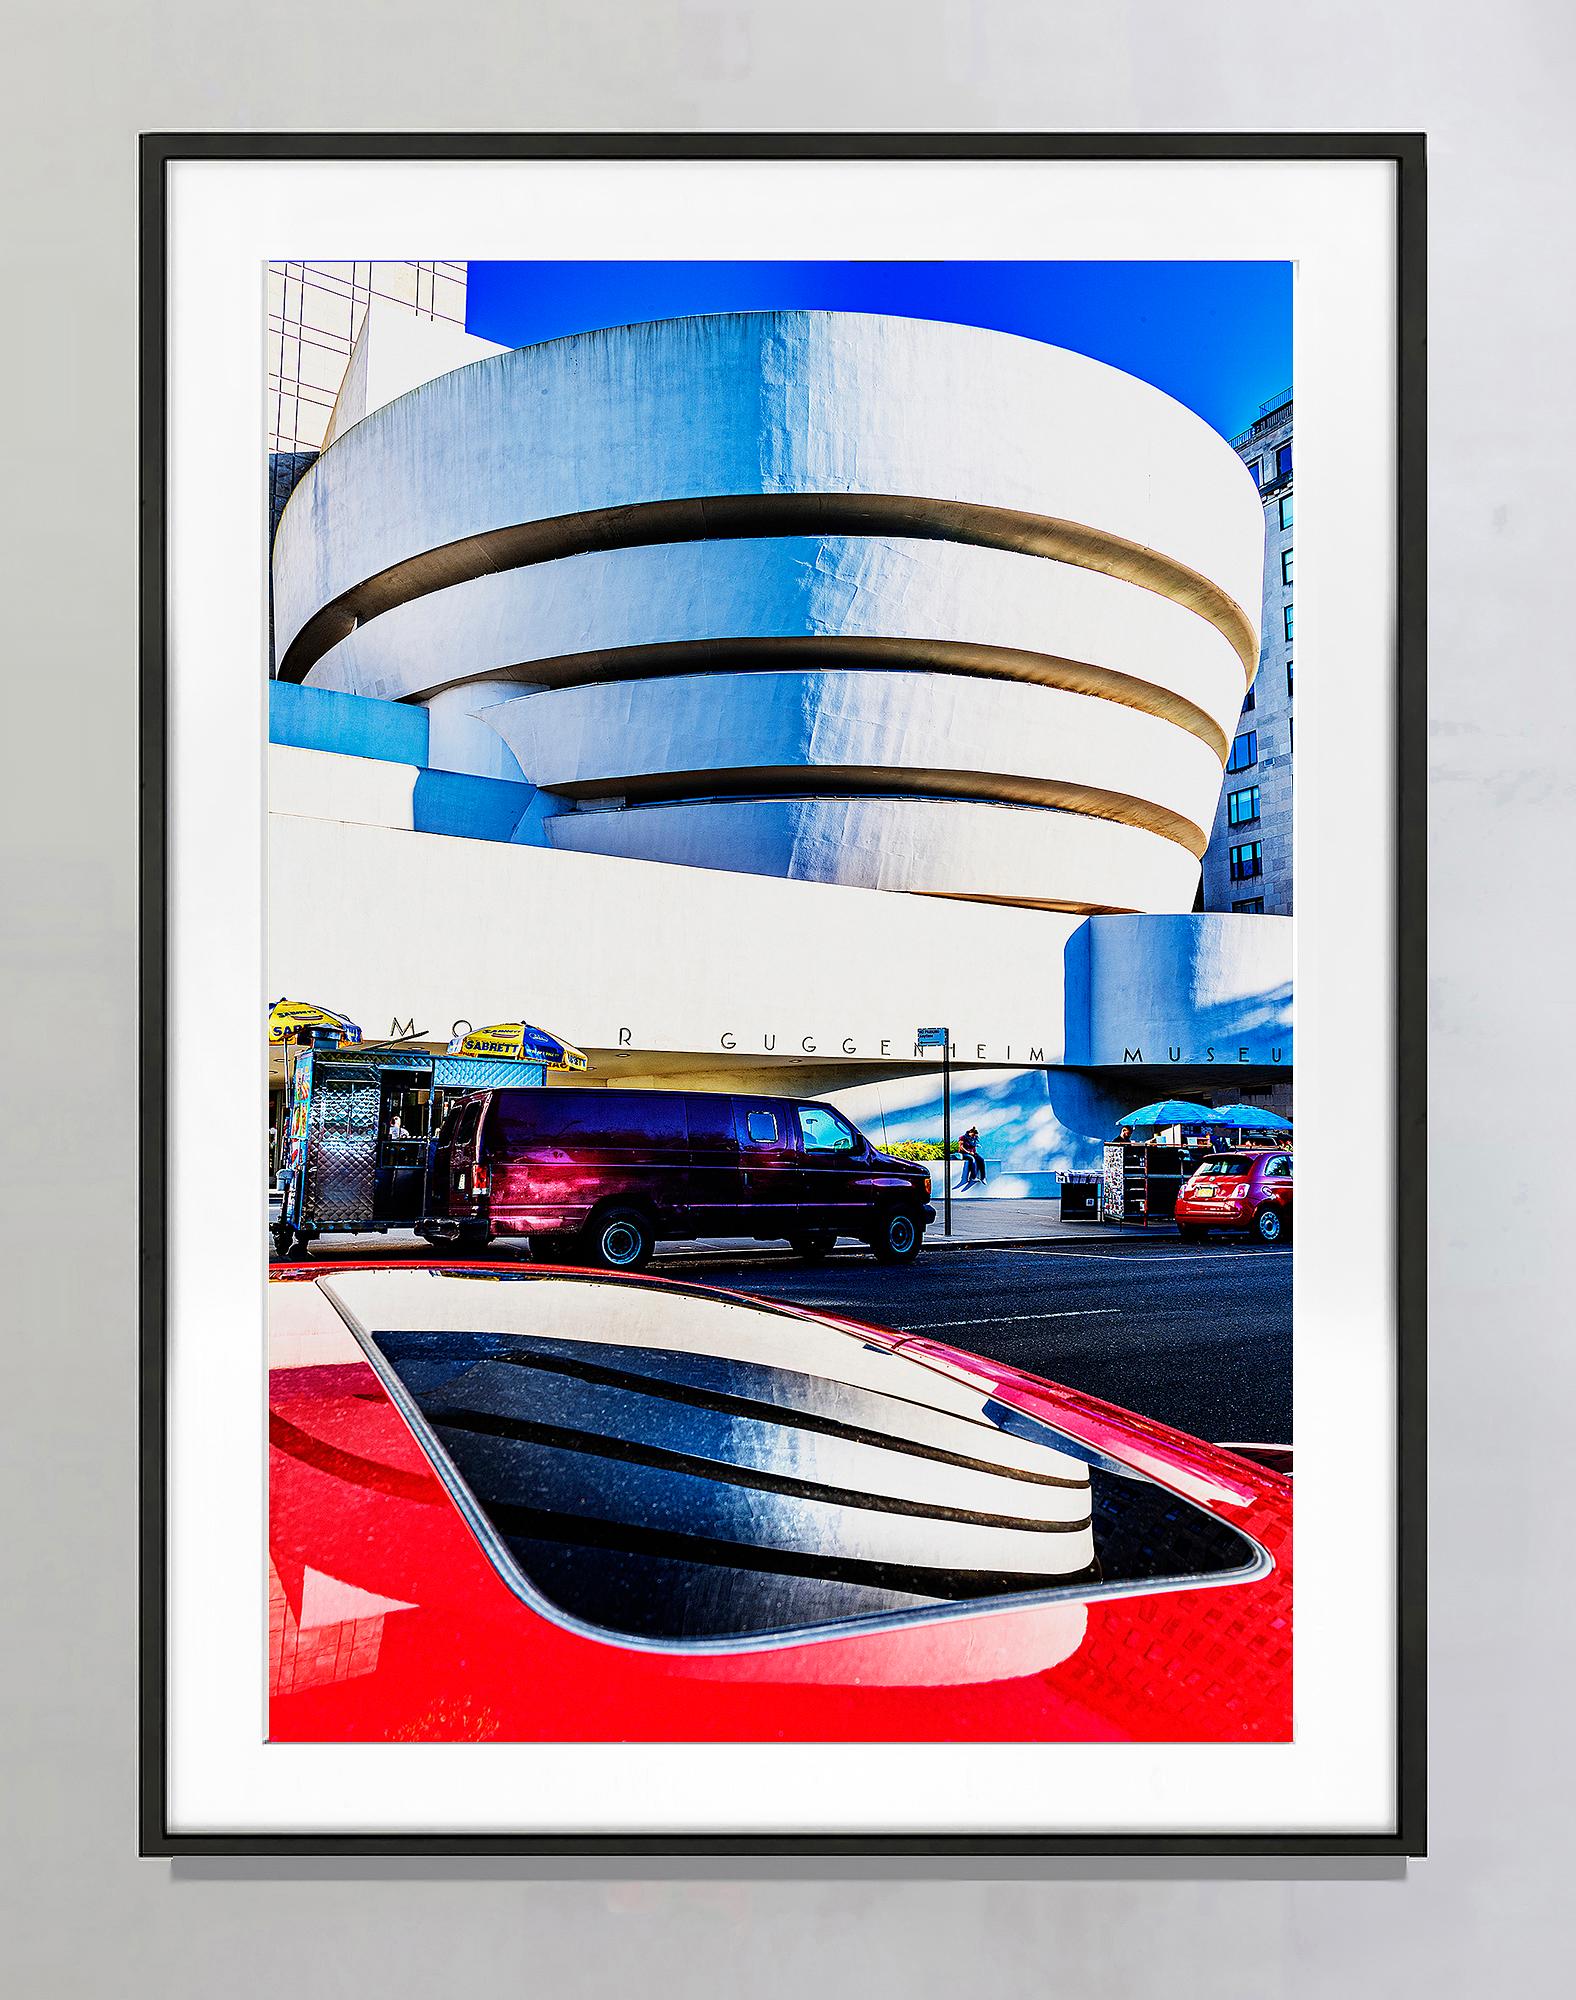 The Guggenheim Museum Reaches Out - Photograph by Mitchell Funk